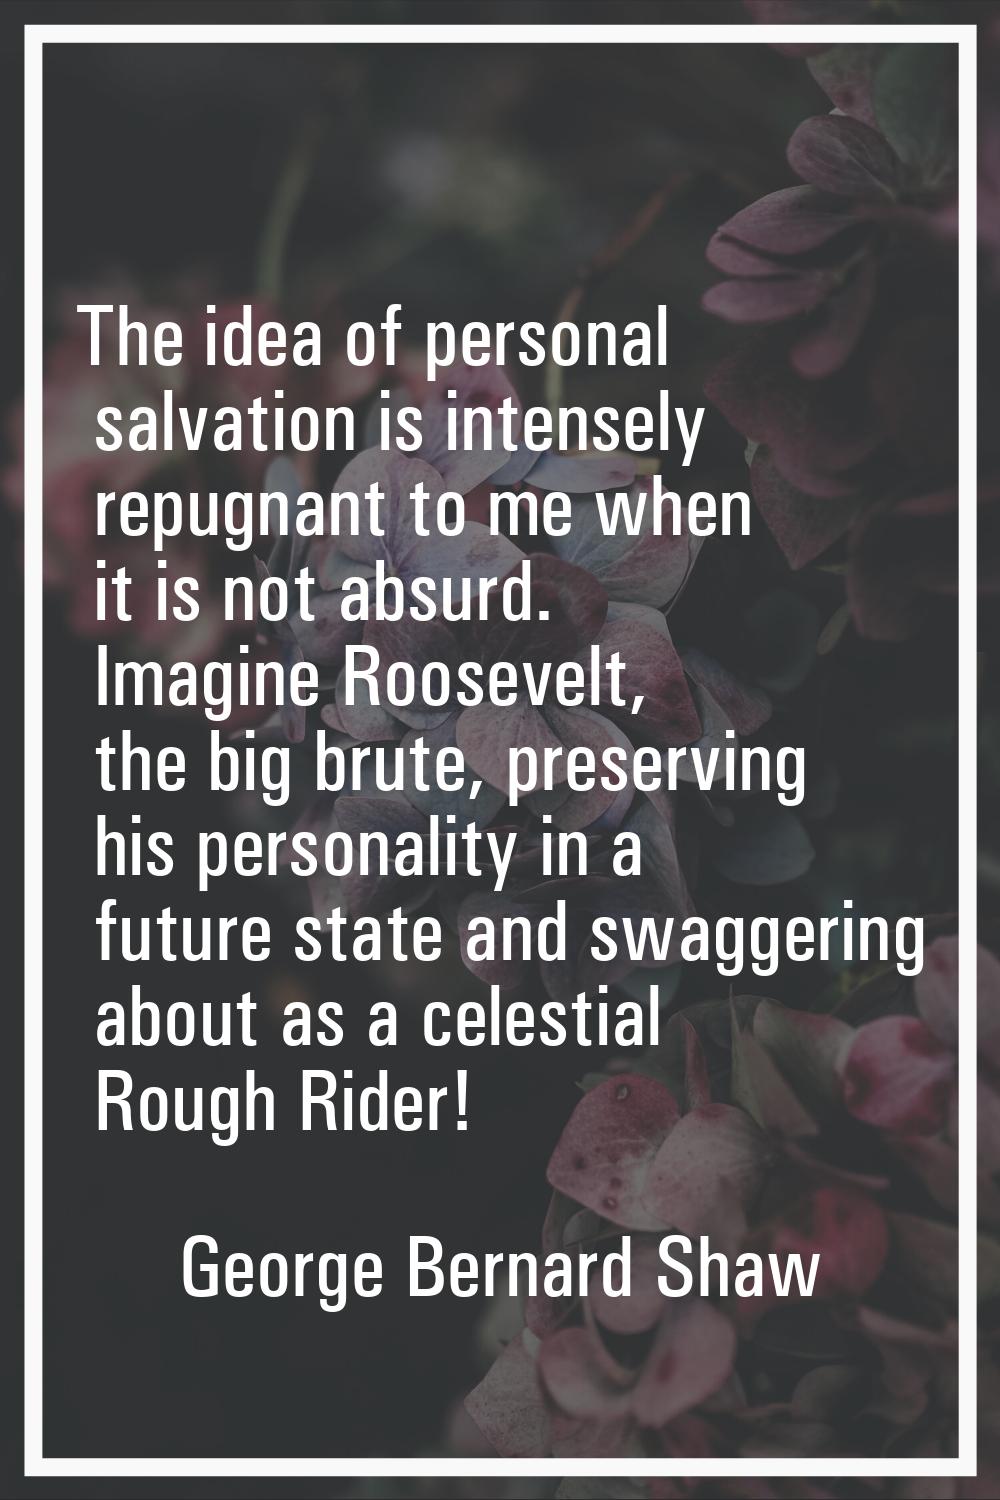 The idea of personal salvation is intensely repugnant to me when it is not absurd. Imagine Roosevel